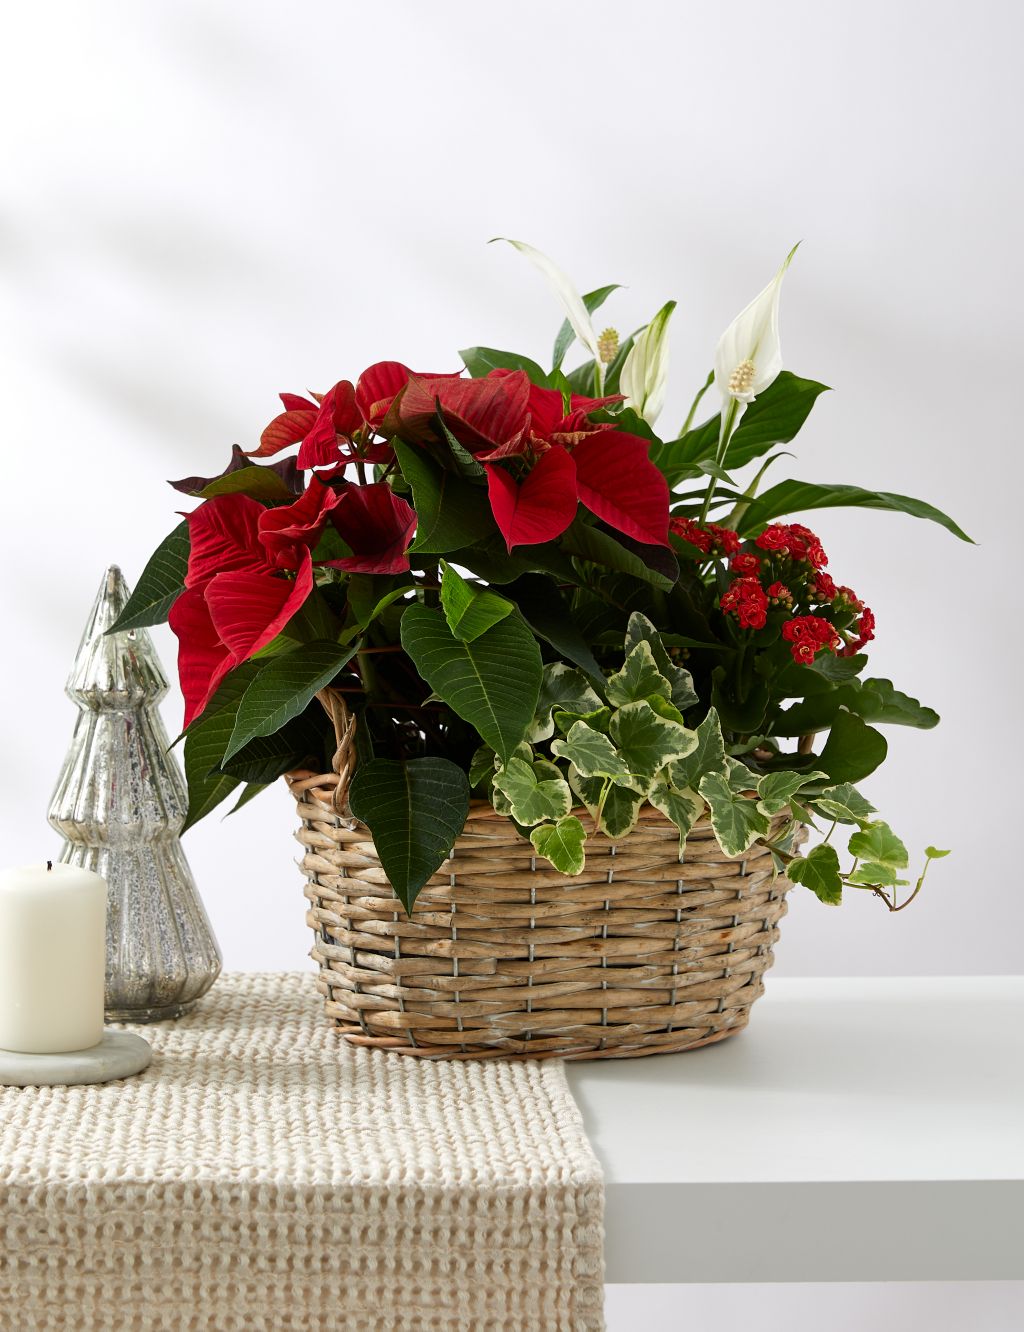 Festive Planted Basket with Poinsettia